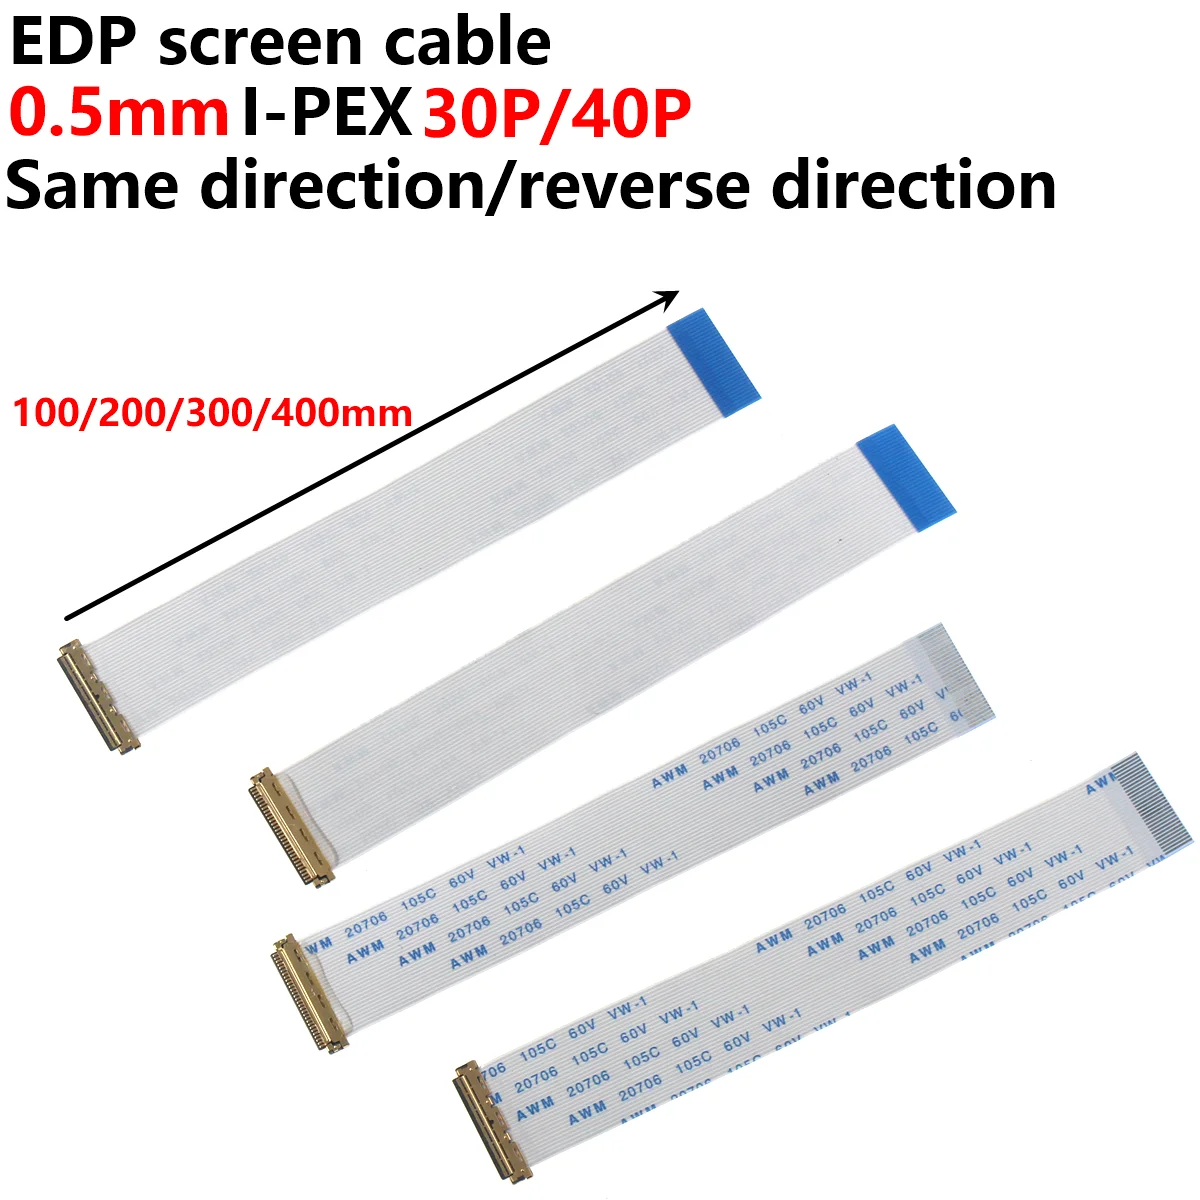 5pcs EDP screen cable 0.5MM I-PEX 20453 30P/40P FFC flexible cable with I-PEX base same direction/reverse direction dc12v ws2815 5050 rgb led panel individually addressable screen digital matrix flexible 4pin dual signal module ws2812b upgrade